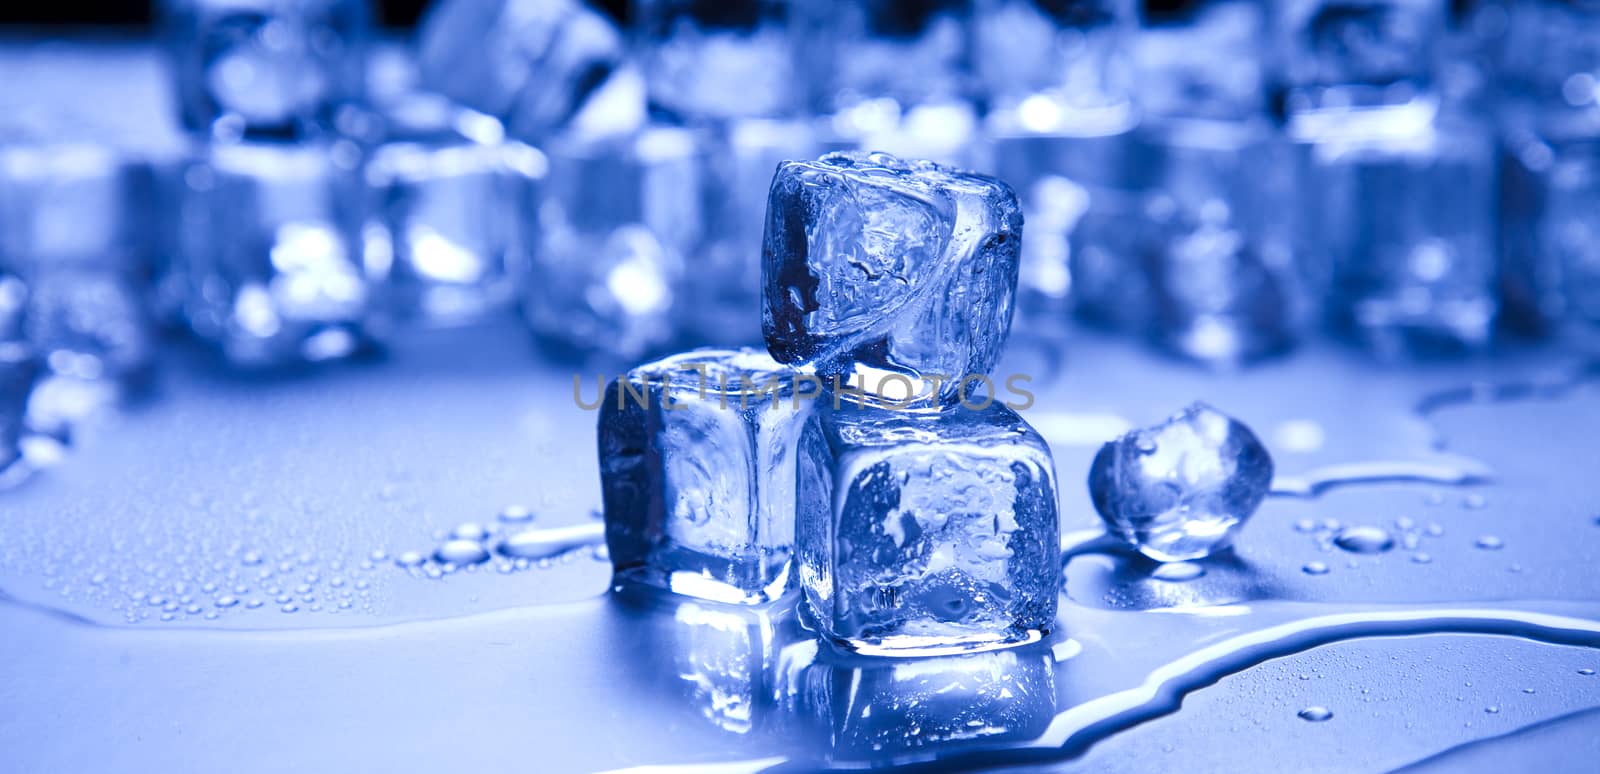 Blue and shiny ice cubes